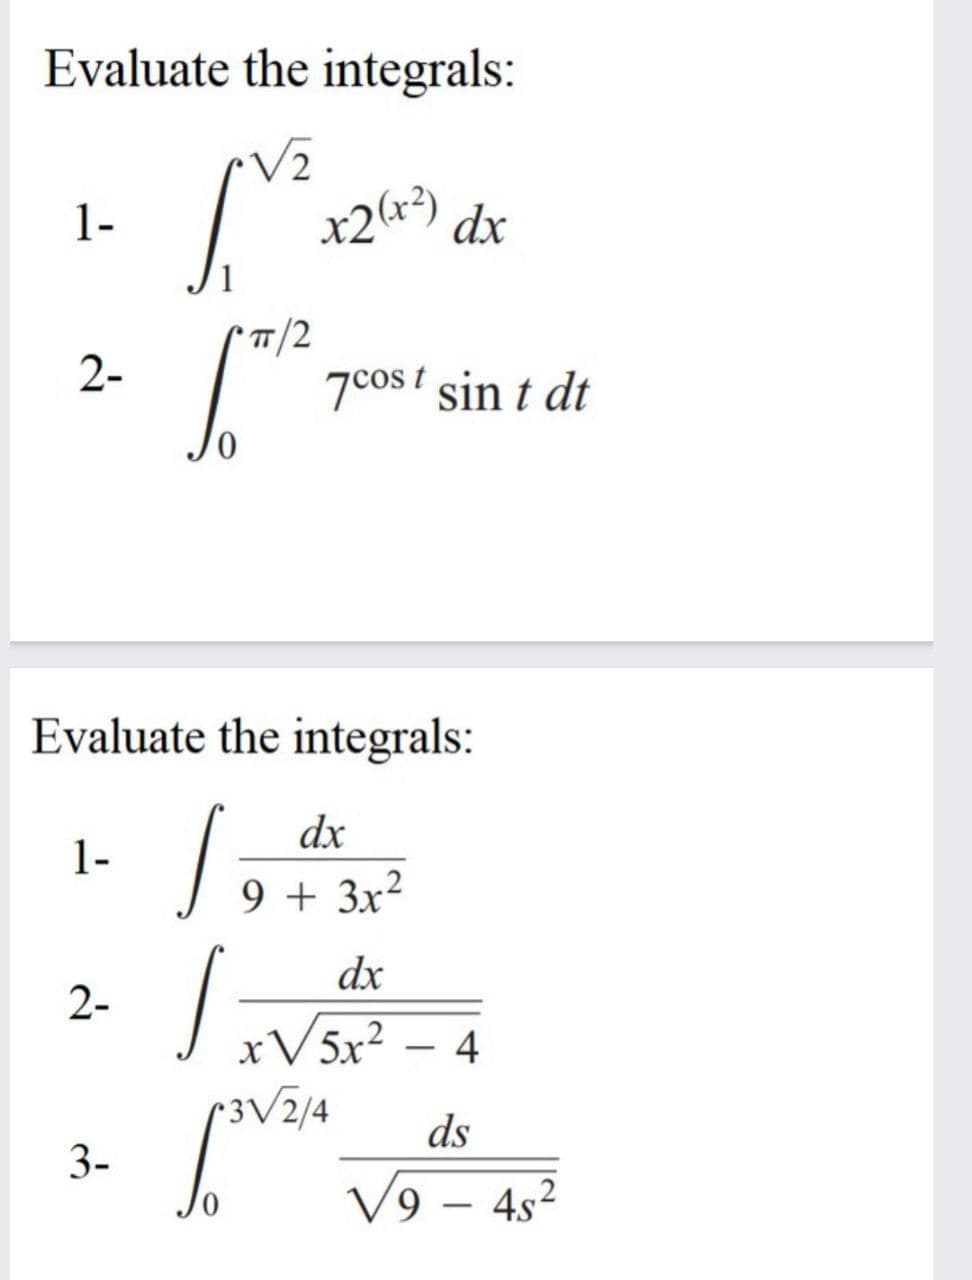 Evaluate the integrals:
1-
dx
*7/2
7cos! sin t dt
2-
0.
Evaluate the integrals:
dx
1-
9 + 3x²
dx
2-
xV5x?
•3V2/4
4
ds
3-
V9 – 4s²
